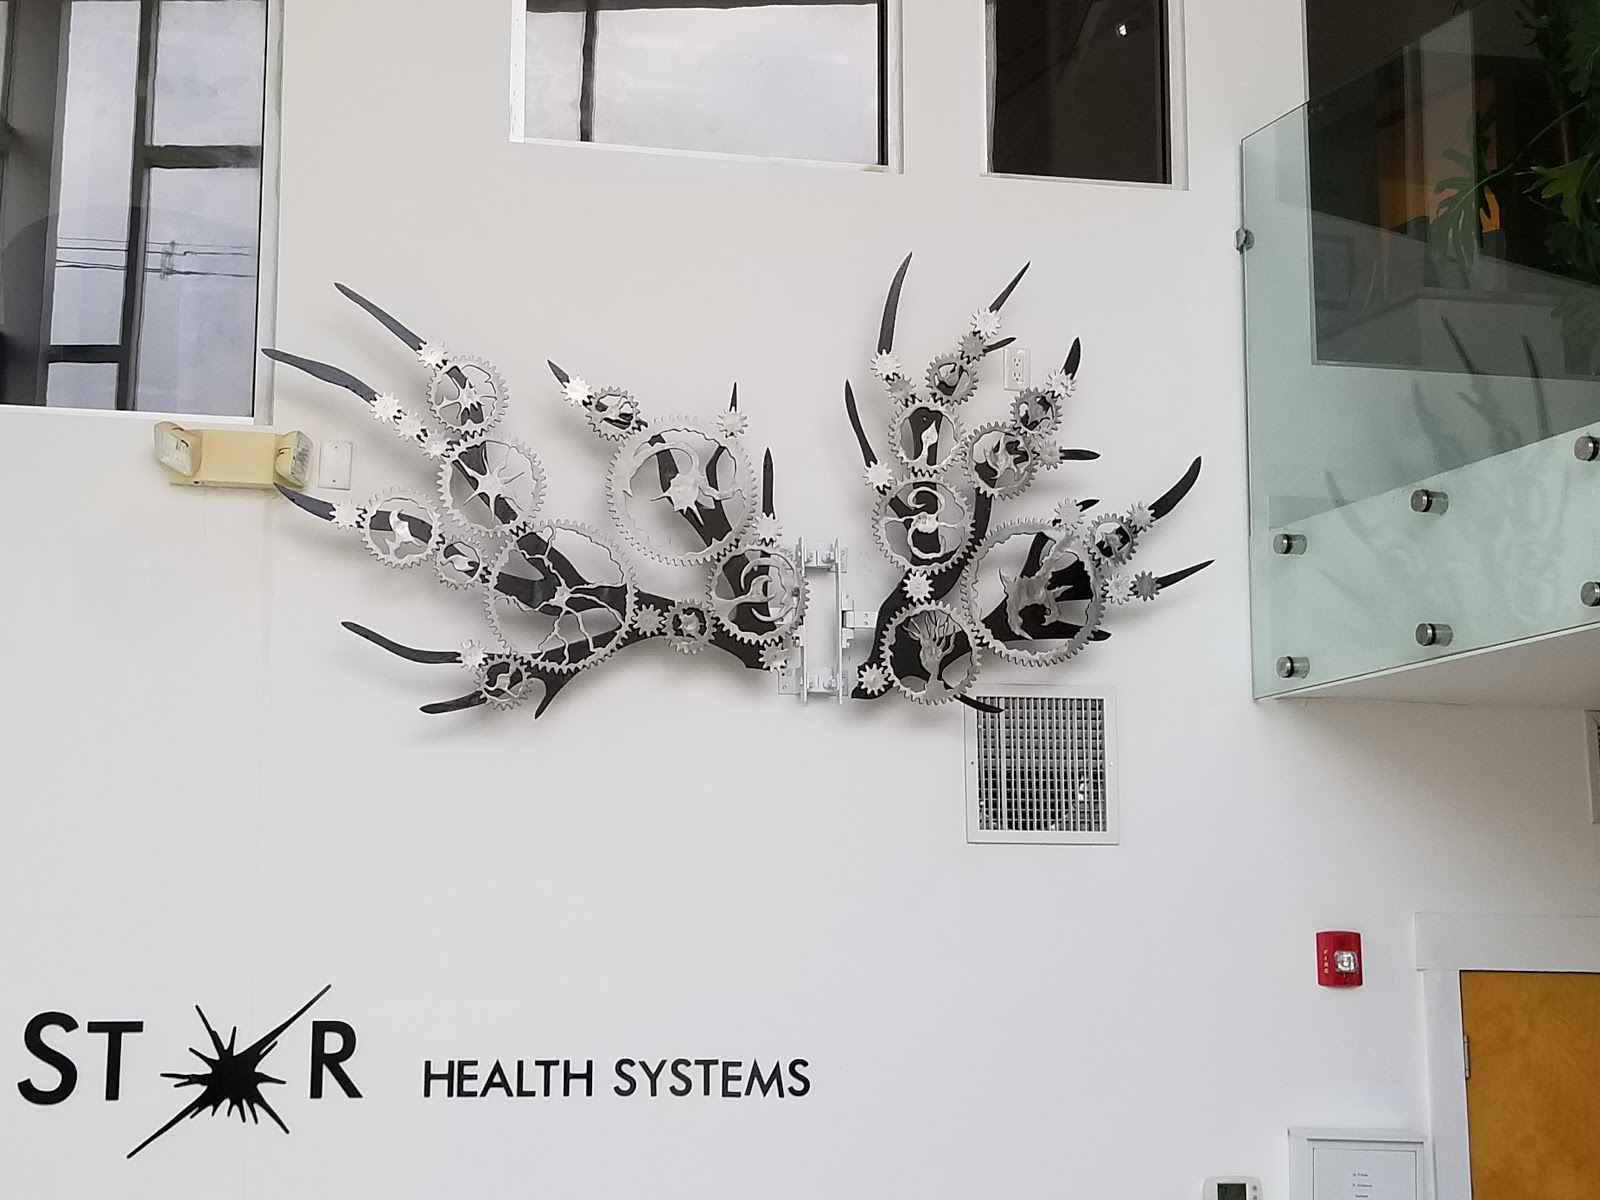 North Star Health Systems